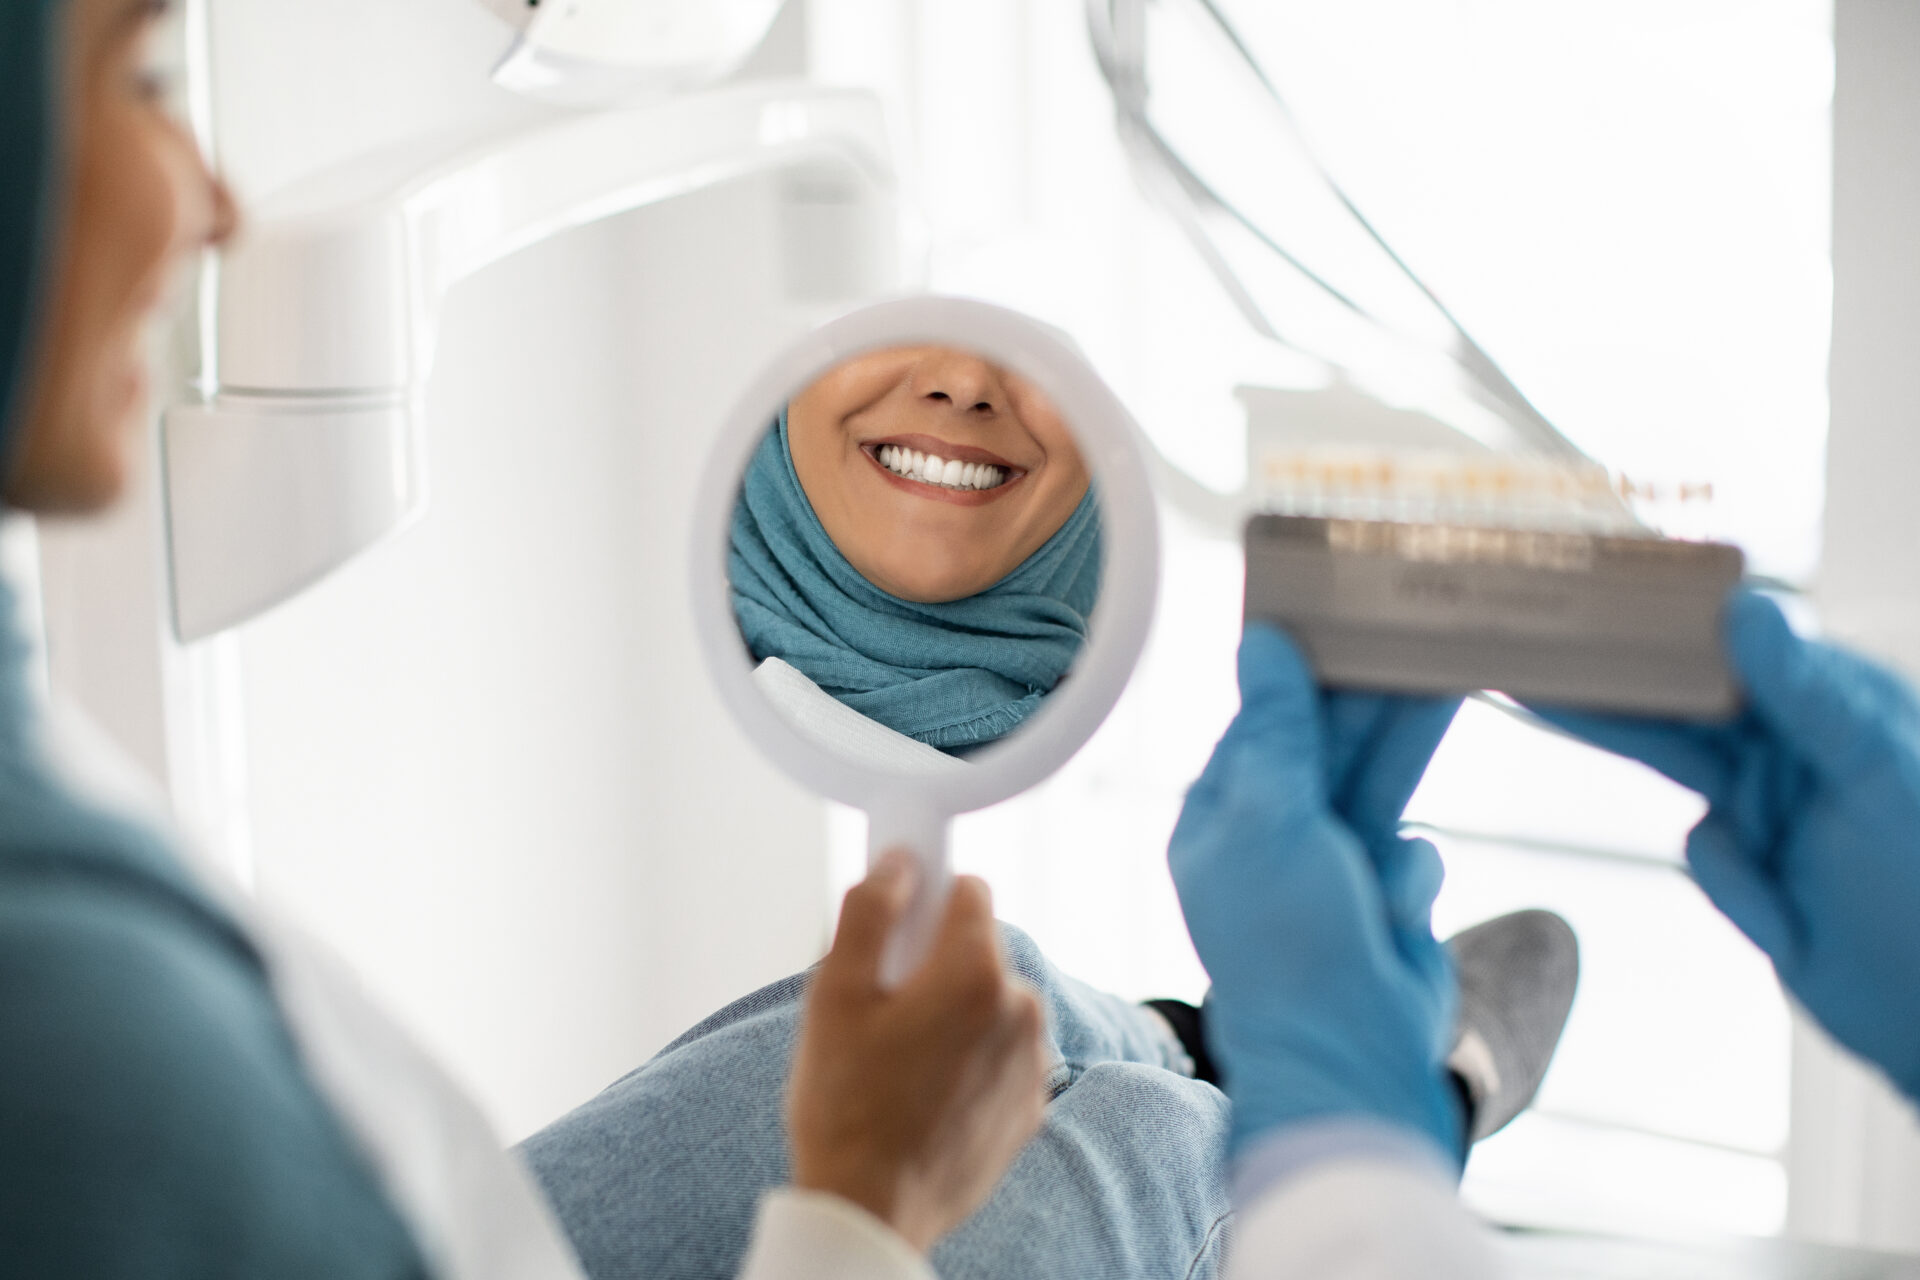 Beautiful Muslim Woman In Hijab Looking At Mirror In Dentists Office, Islamic Female Patient Enjoying Her Beautiful Smile And Teeth After Dental Treatment In Stomatologic Clinic, Selective Focus